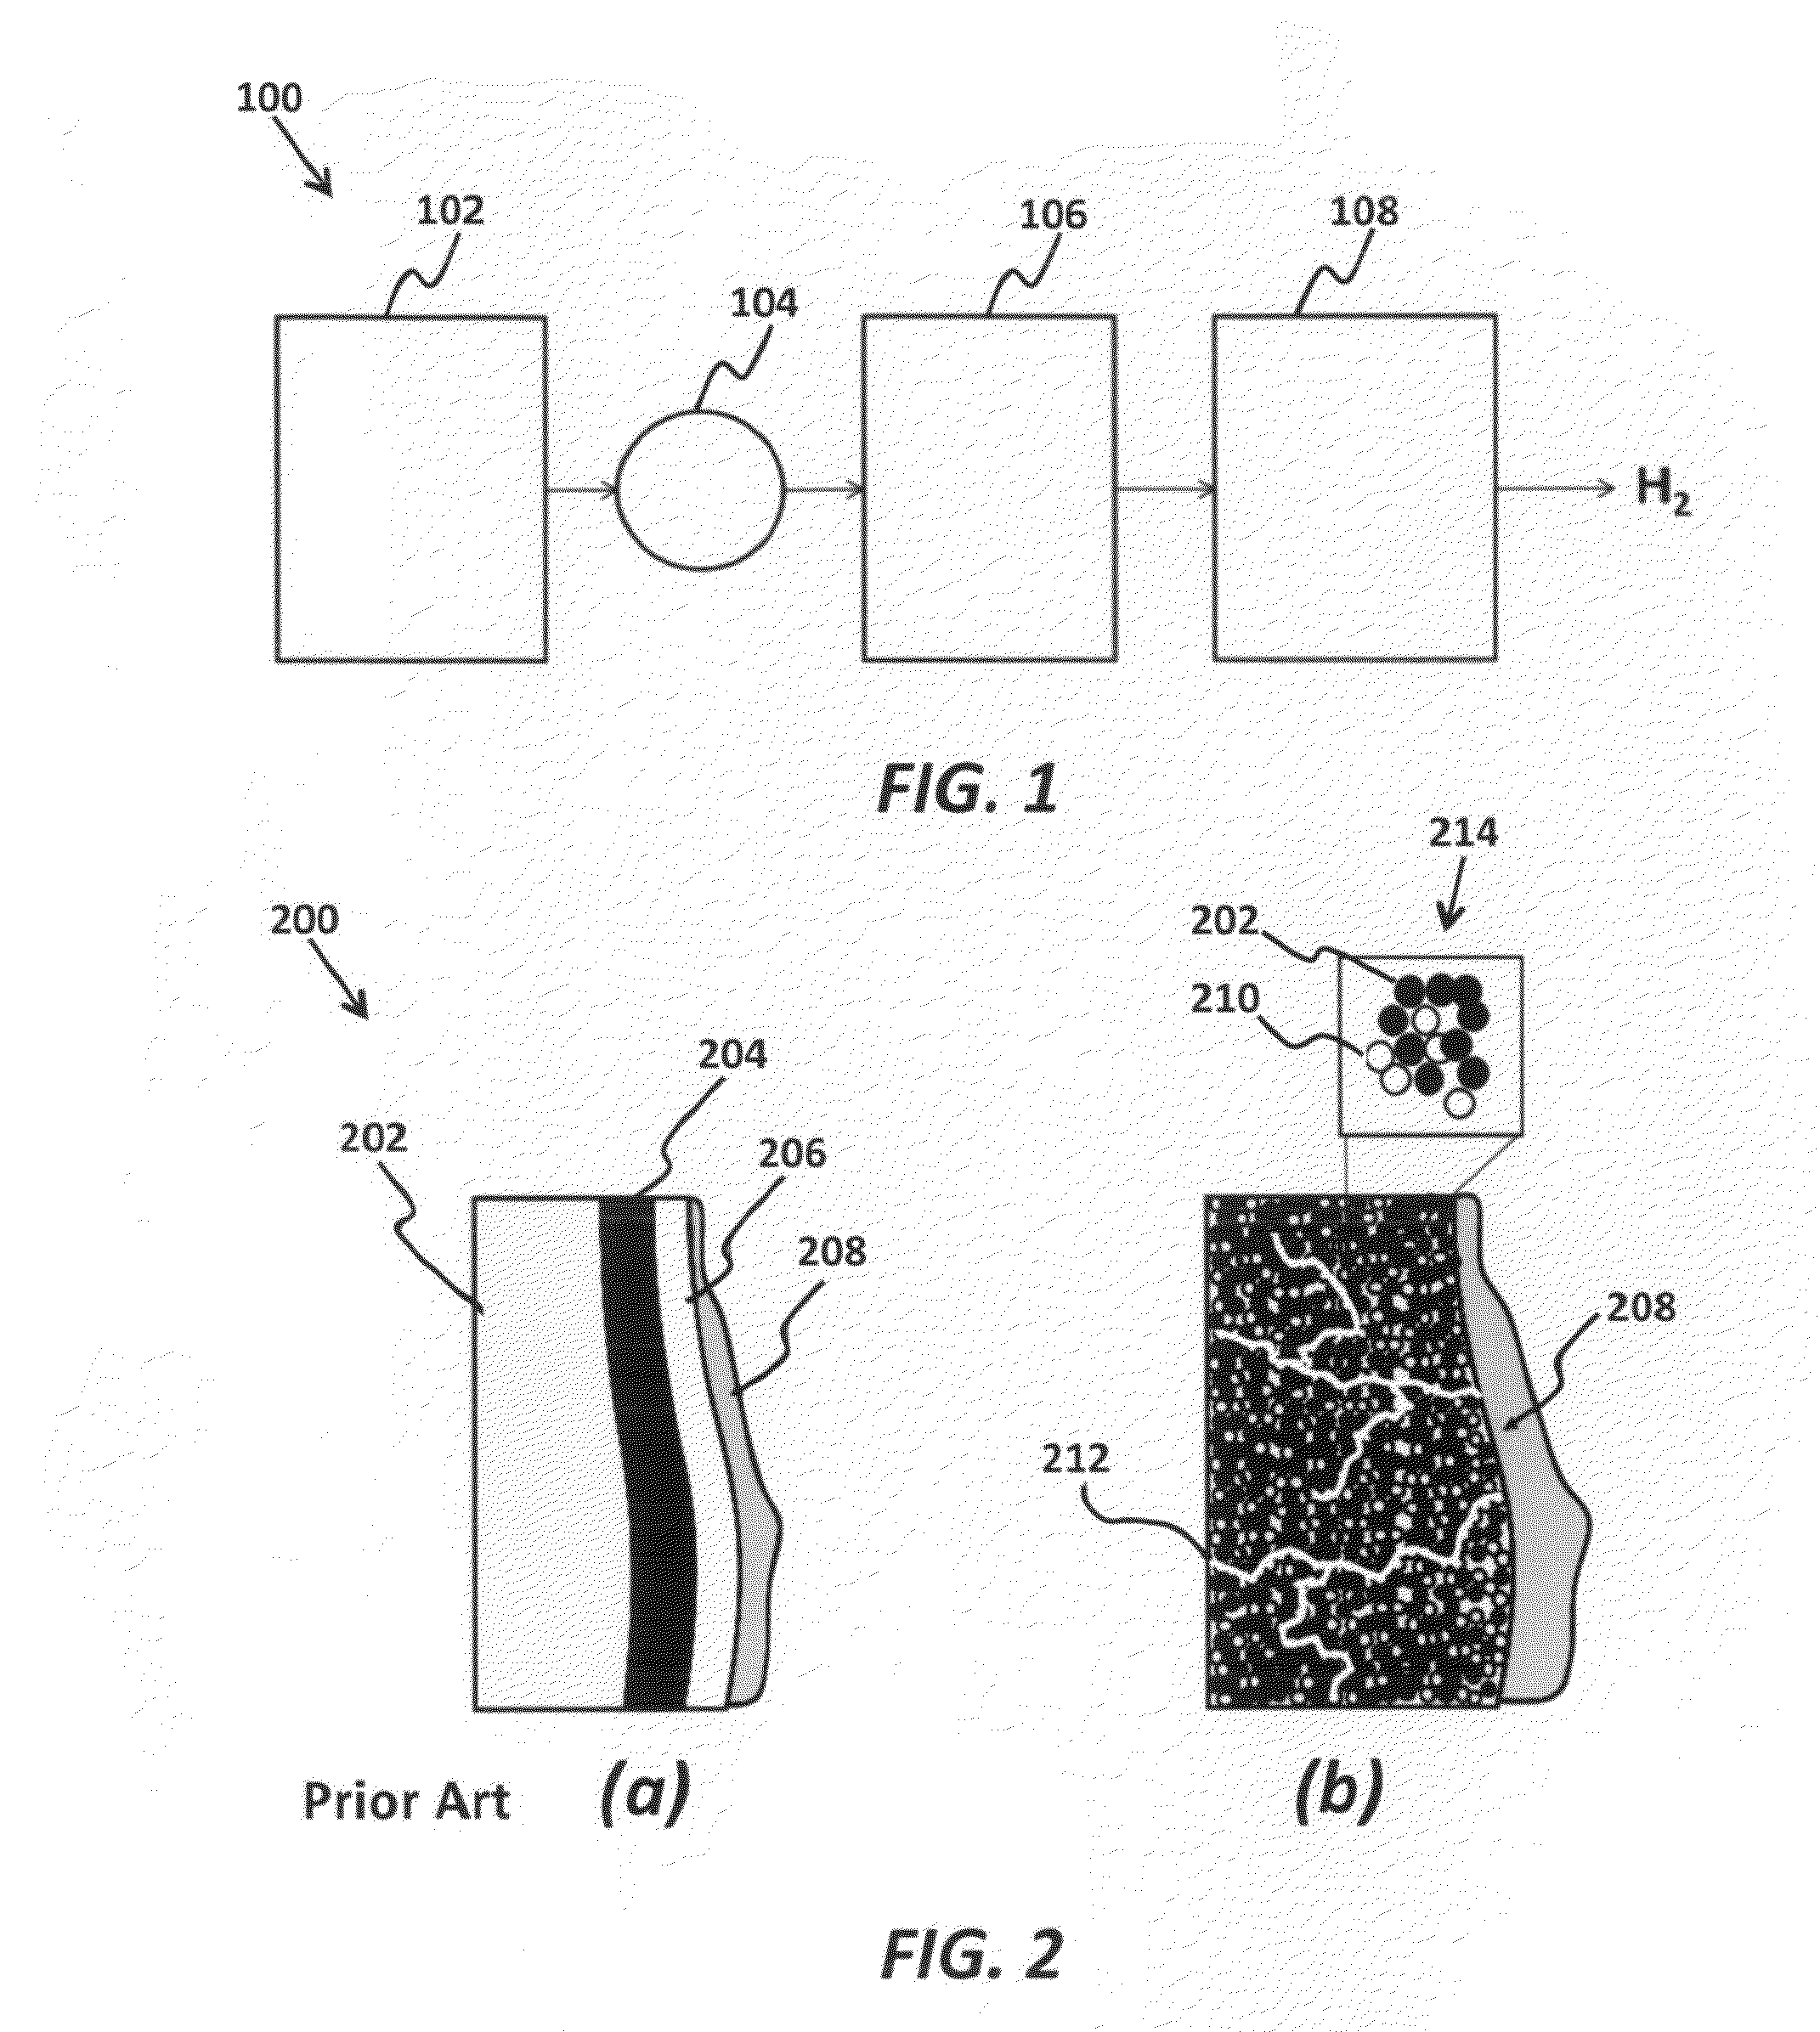 Chemical hydride formulation and system design for controlled generation of hydrogen